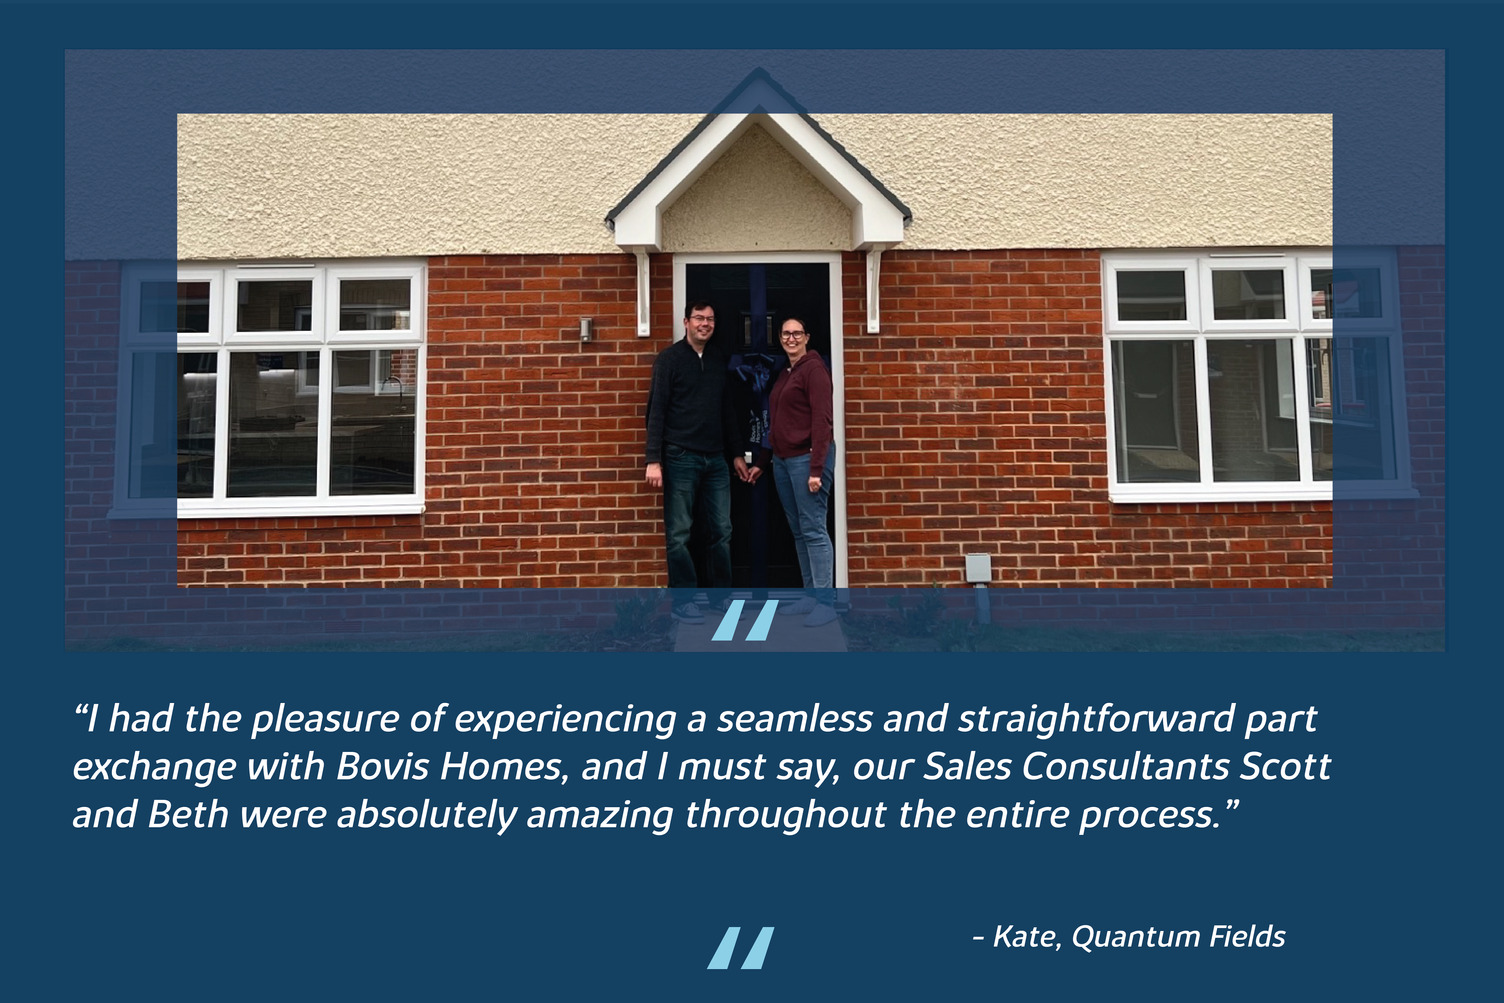 Customer is impressed with seamless and straightforward part exchange with Bovis Homes